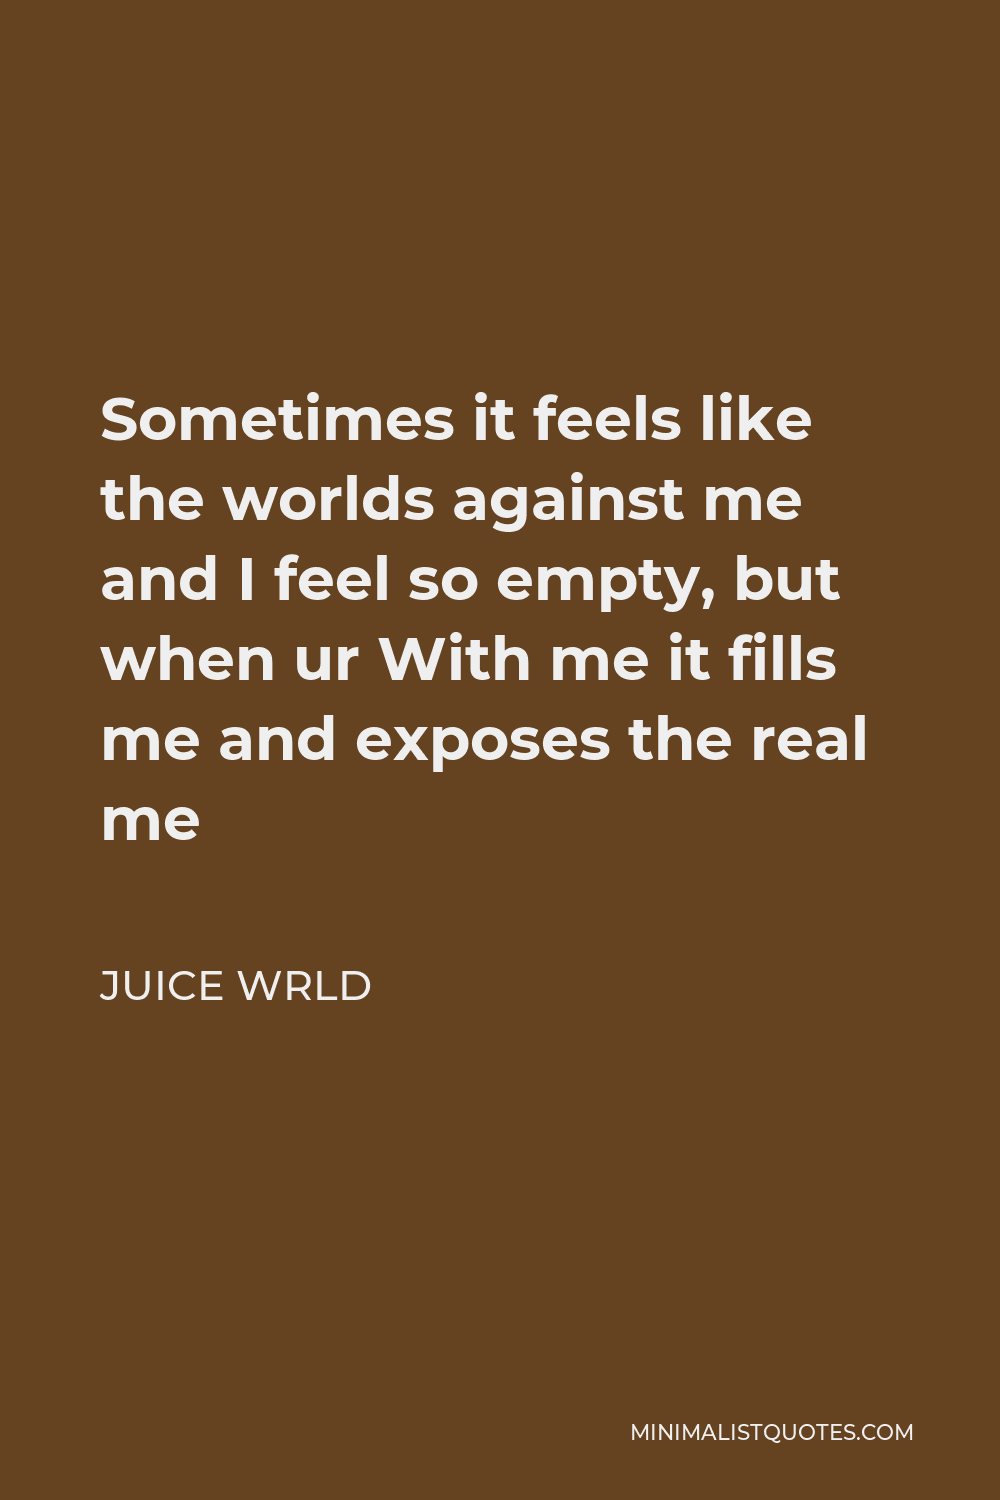 Juice Wrld Quote - Sometimes it feels like the worlds against me and I feel so empty, but when ur With me it fills me and exposes the real me